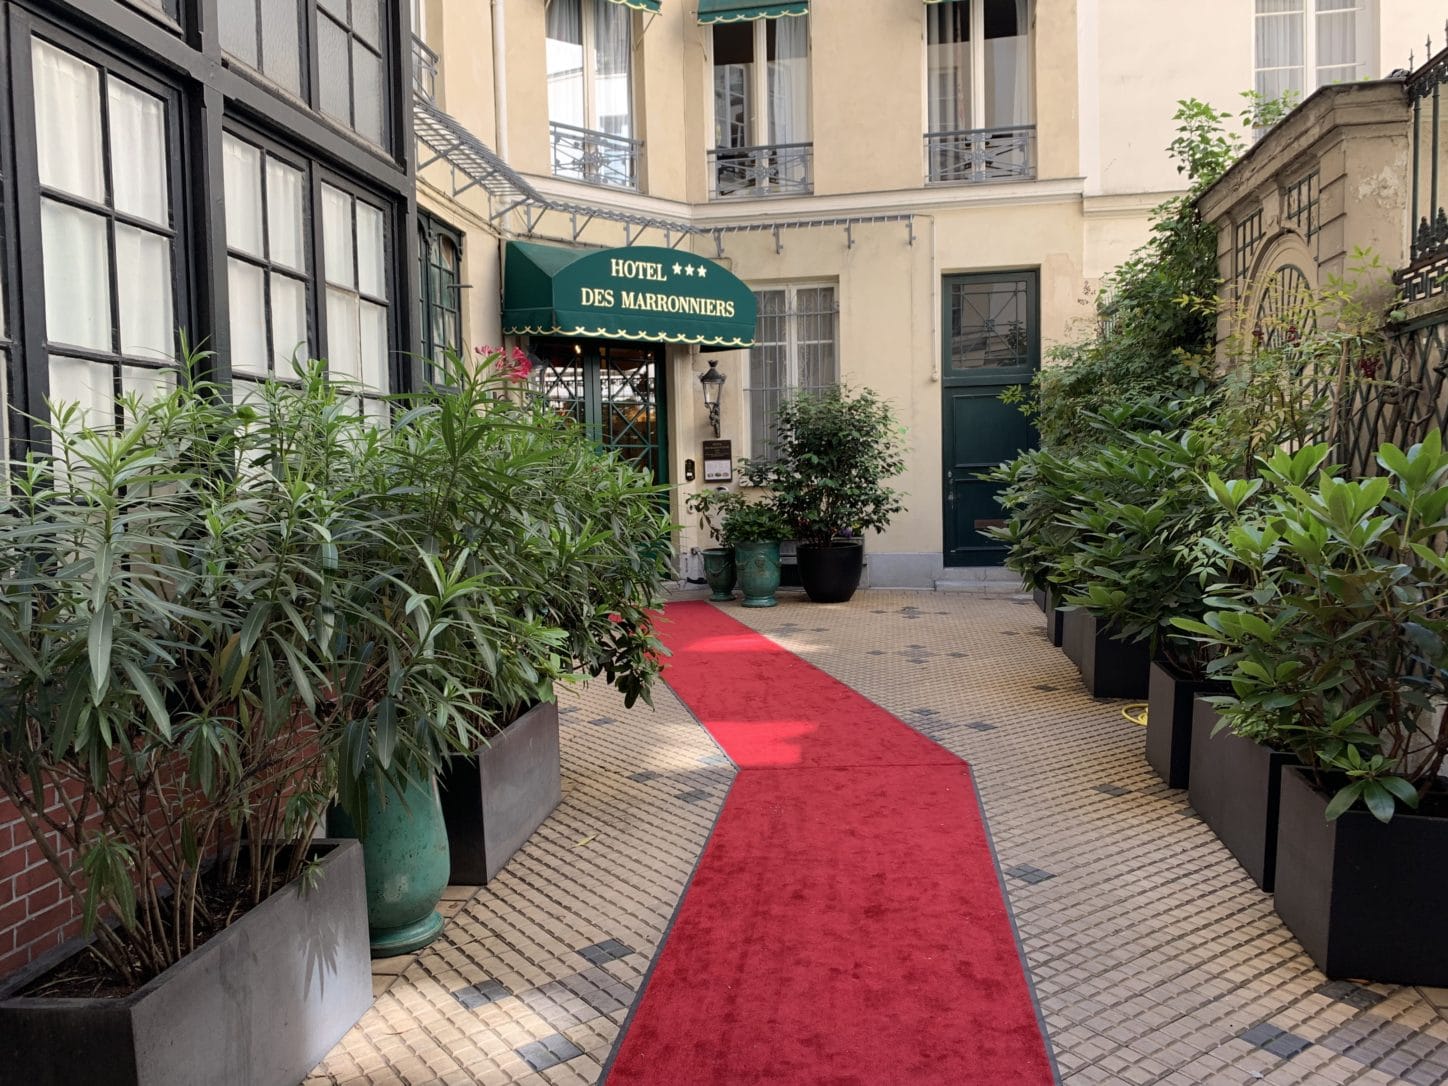 Red carpet entry way of Hotel des Marroniers. Photo by ConsumerMojo.com